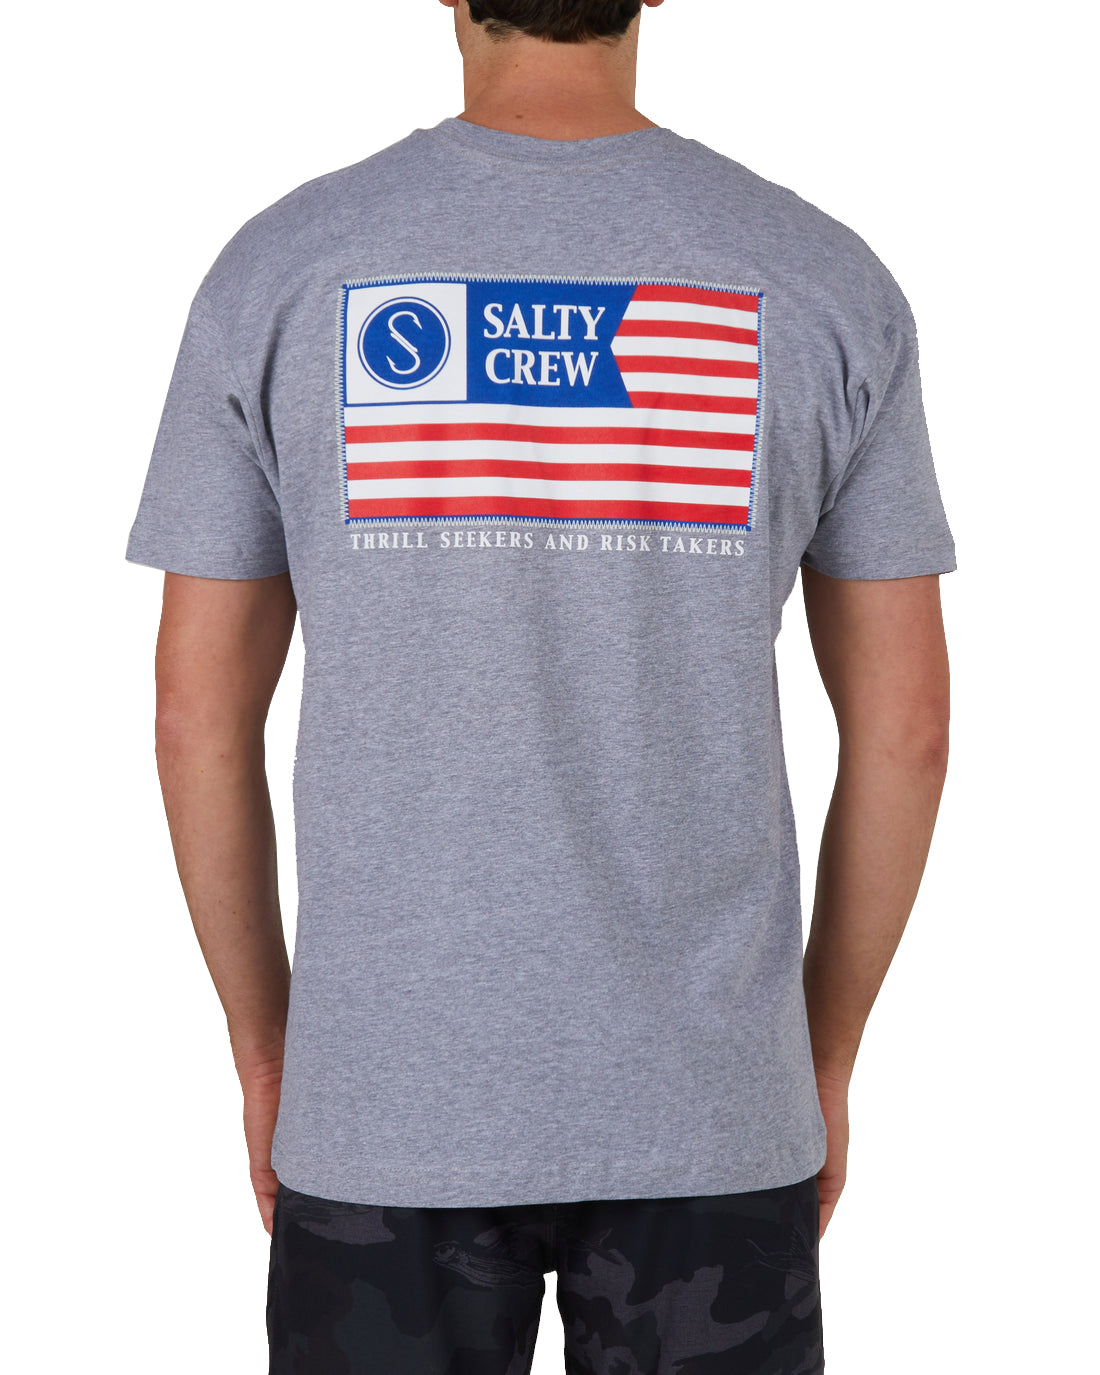 Salty Crew Freedom Flag Mens SS Tee AthleticHeather L